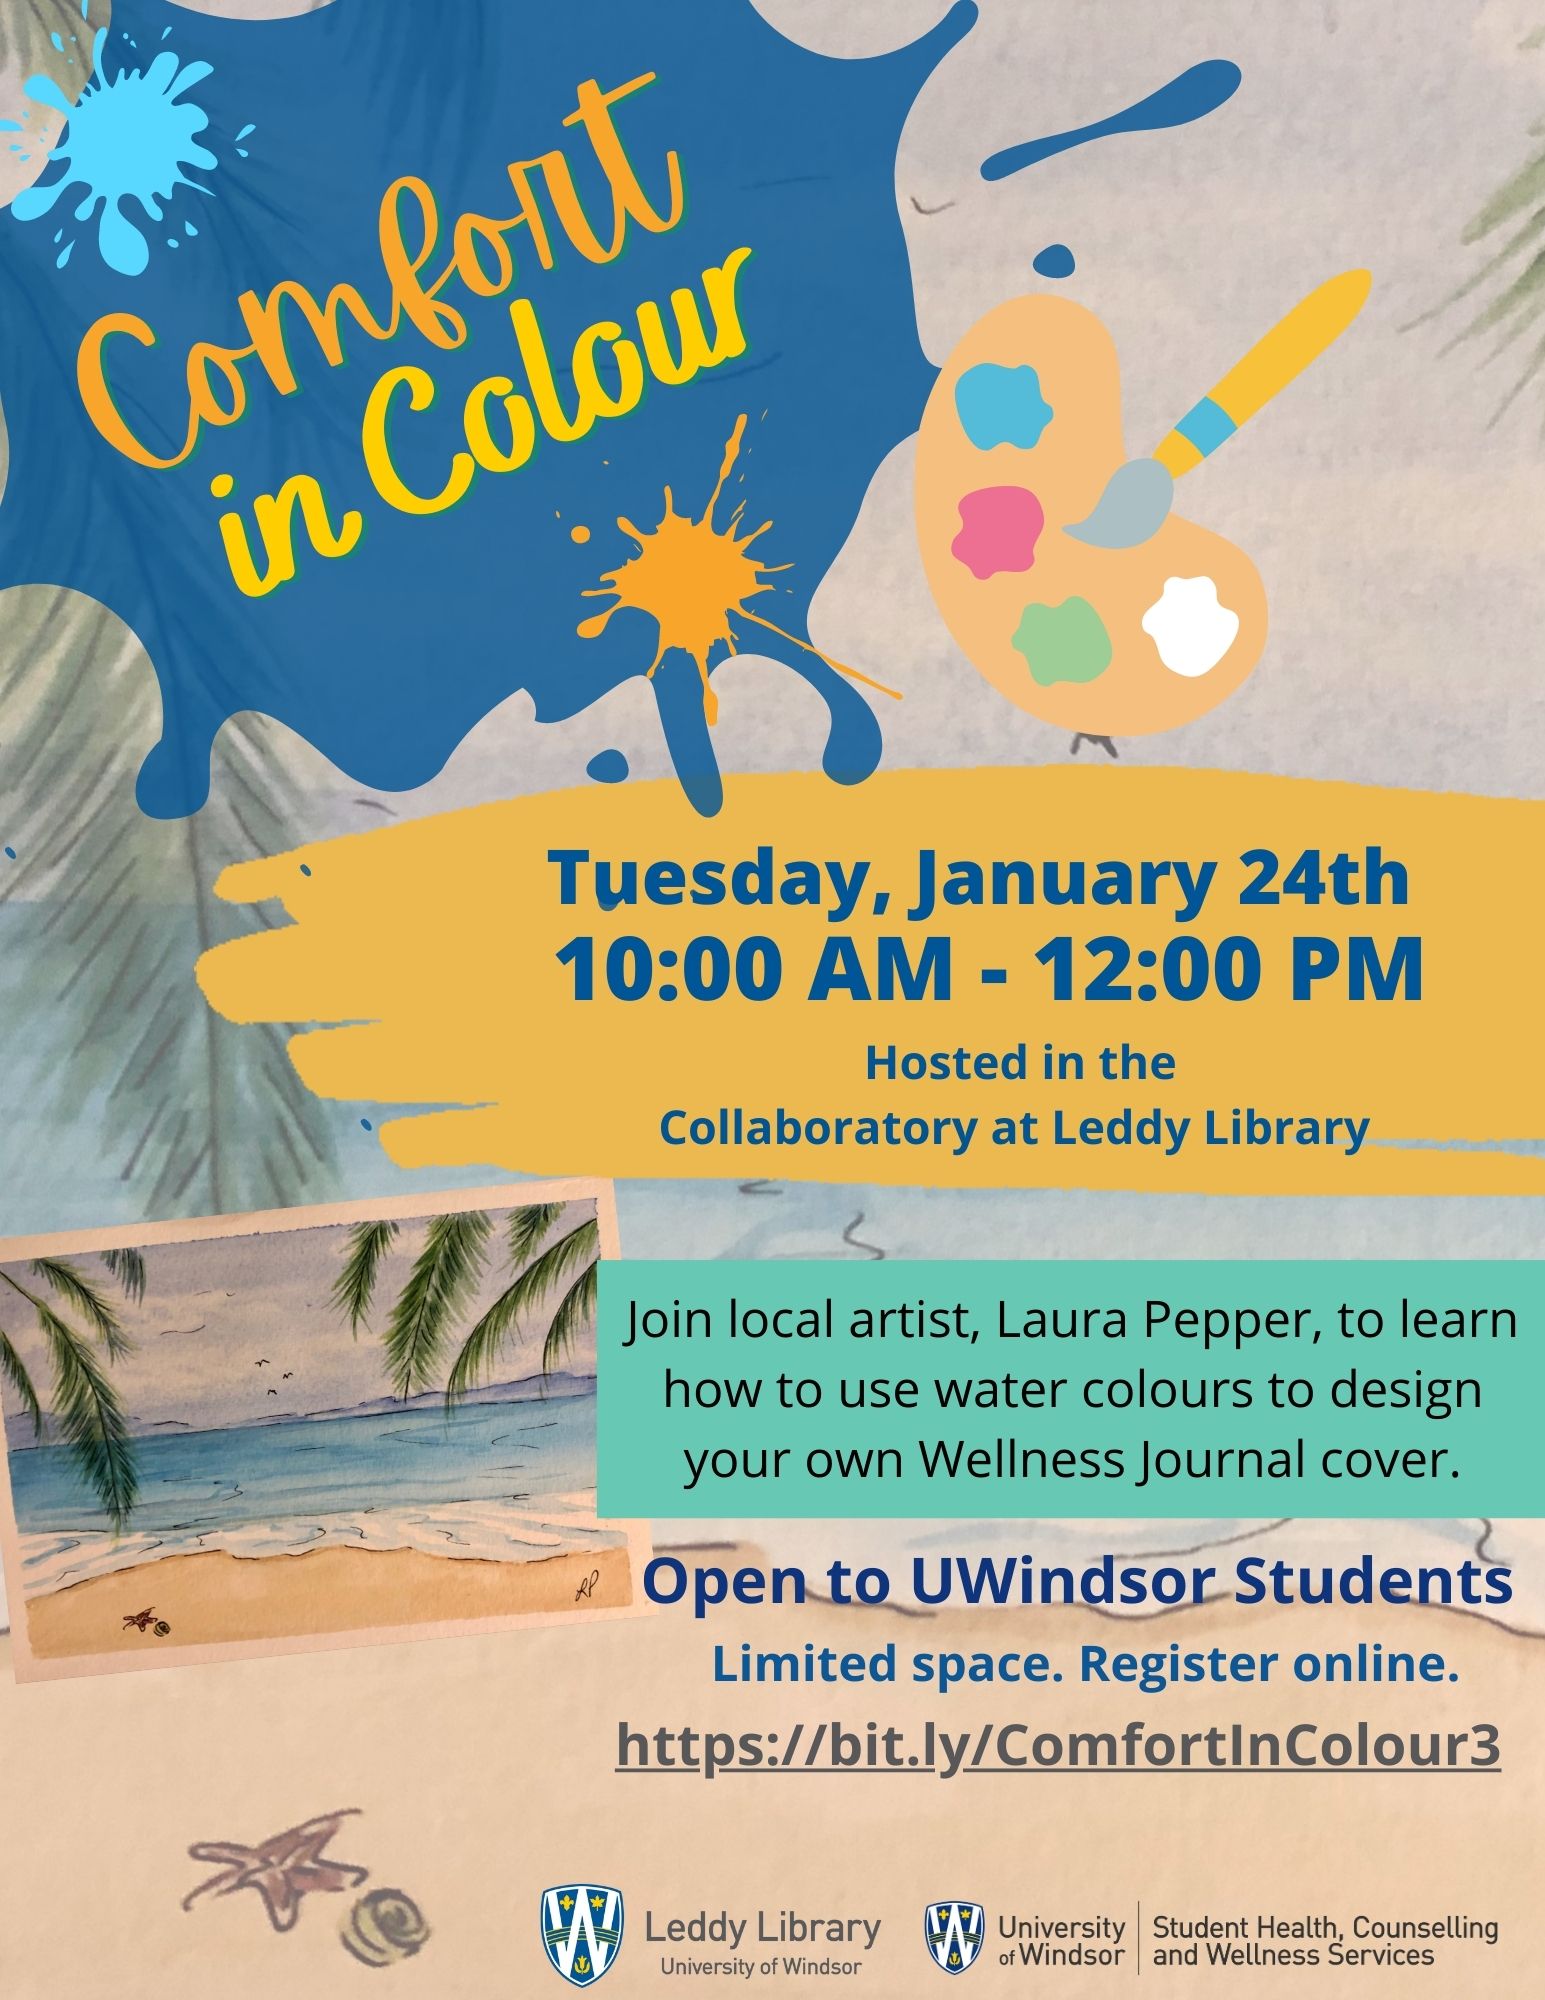 Comfort in Colour poster with water colour beach scene. Tuesday, January 24th. 10 am - 12 pm in the Leddy Library Collaboratory